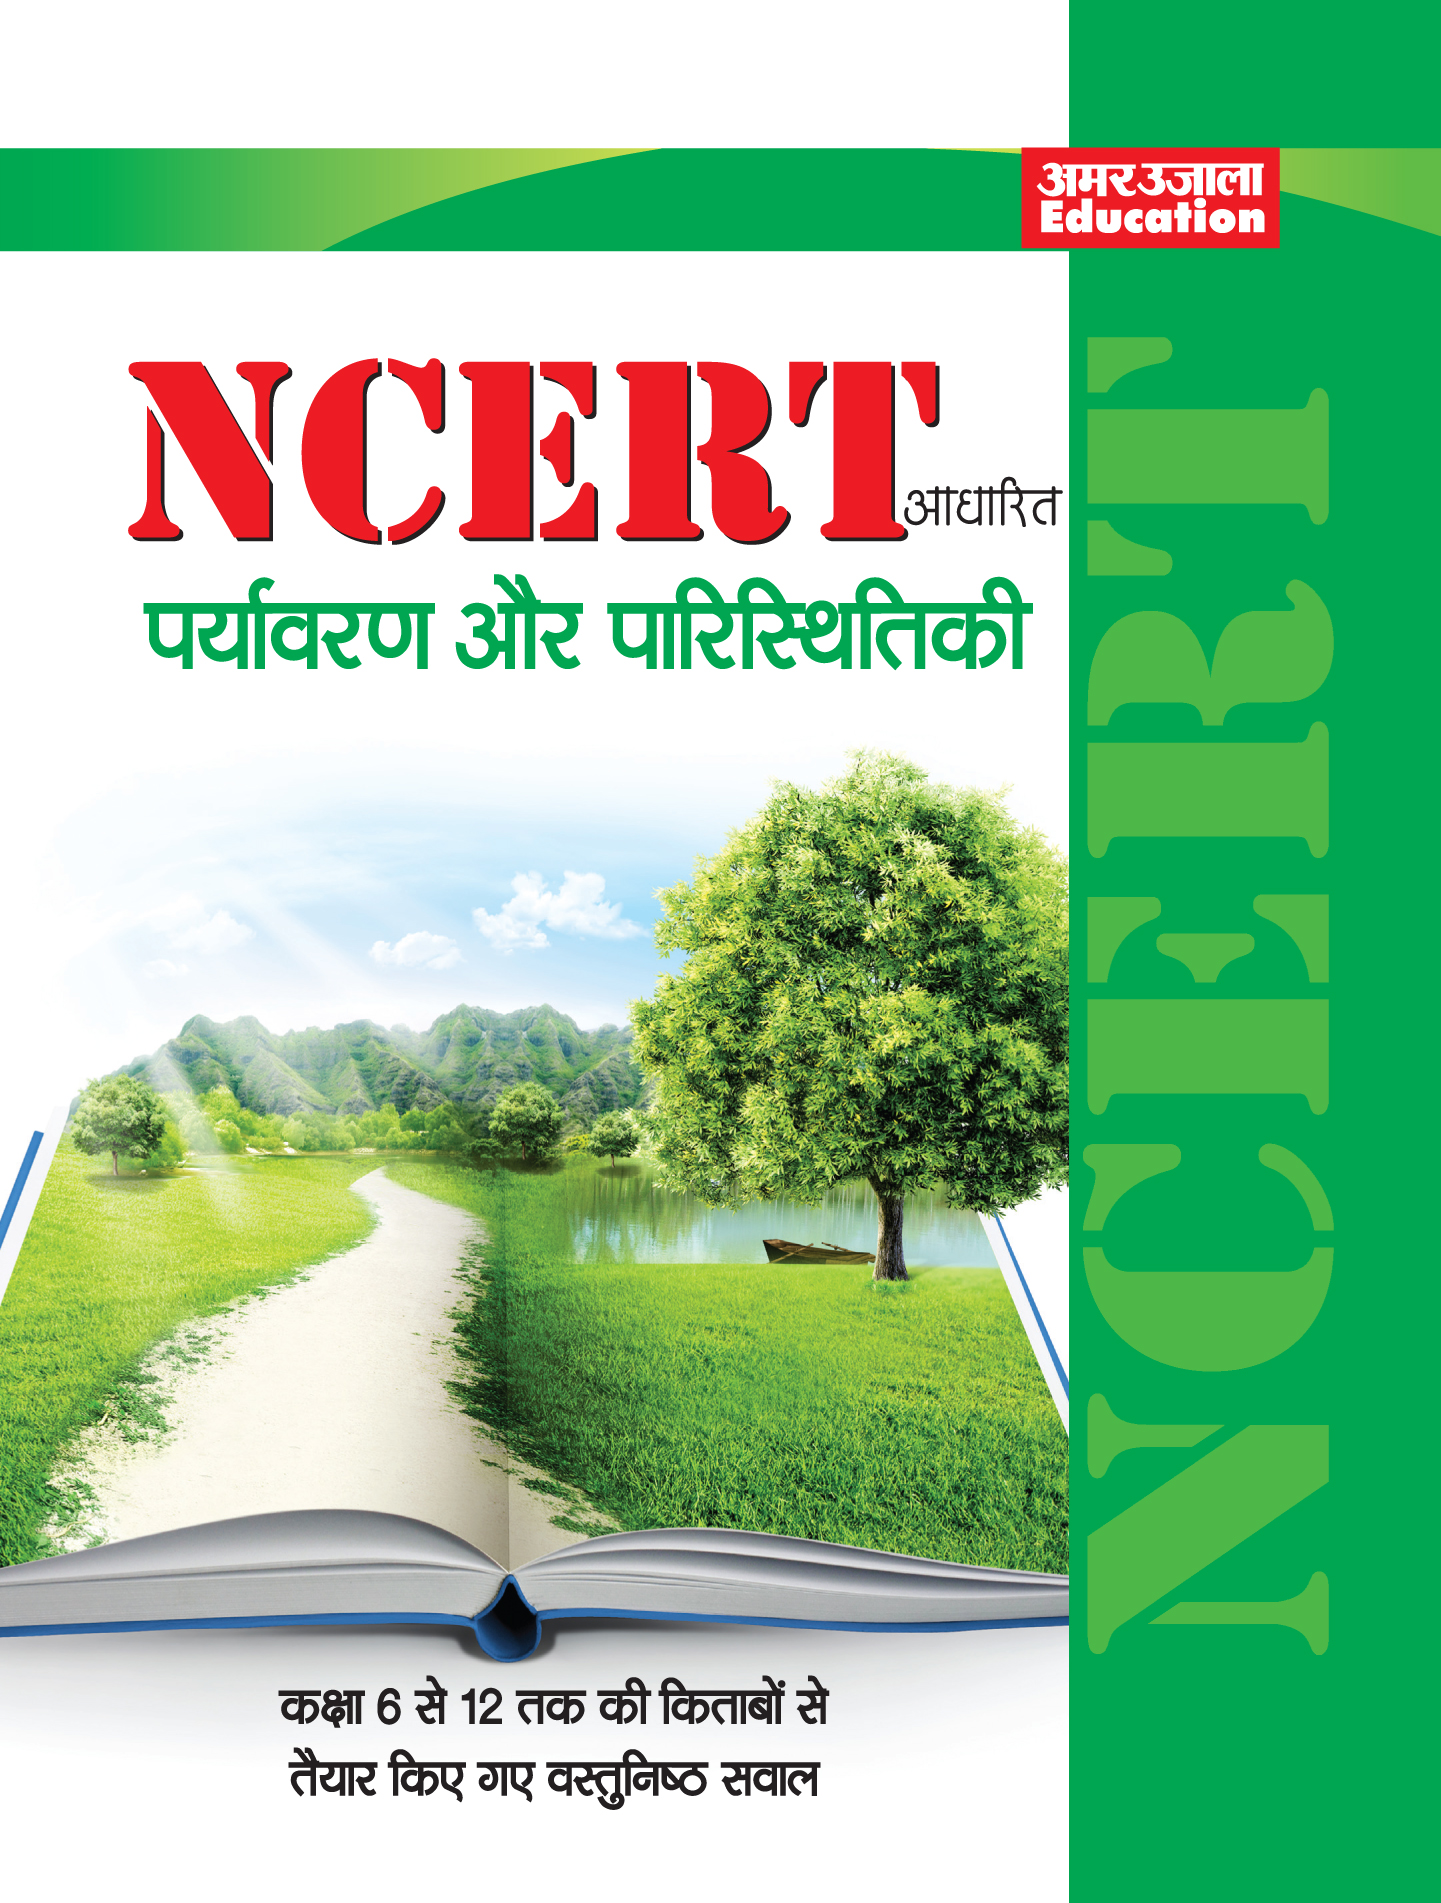 NCERT Objective Ecology and Environment